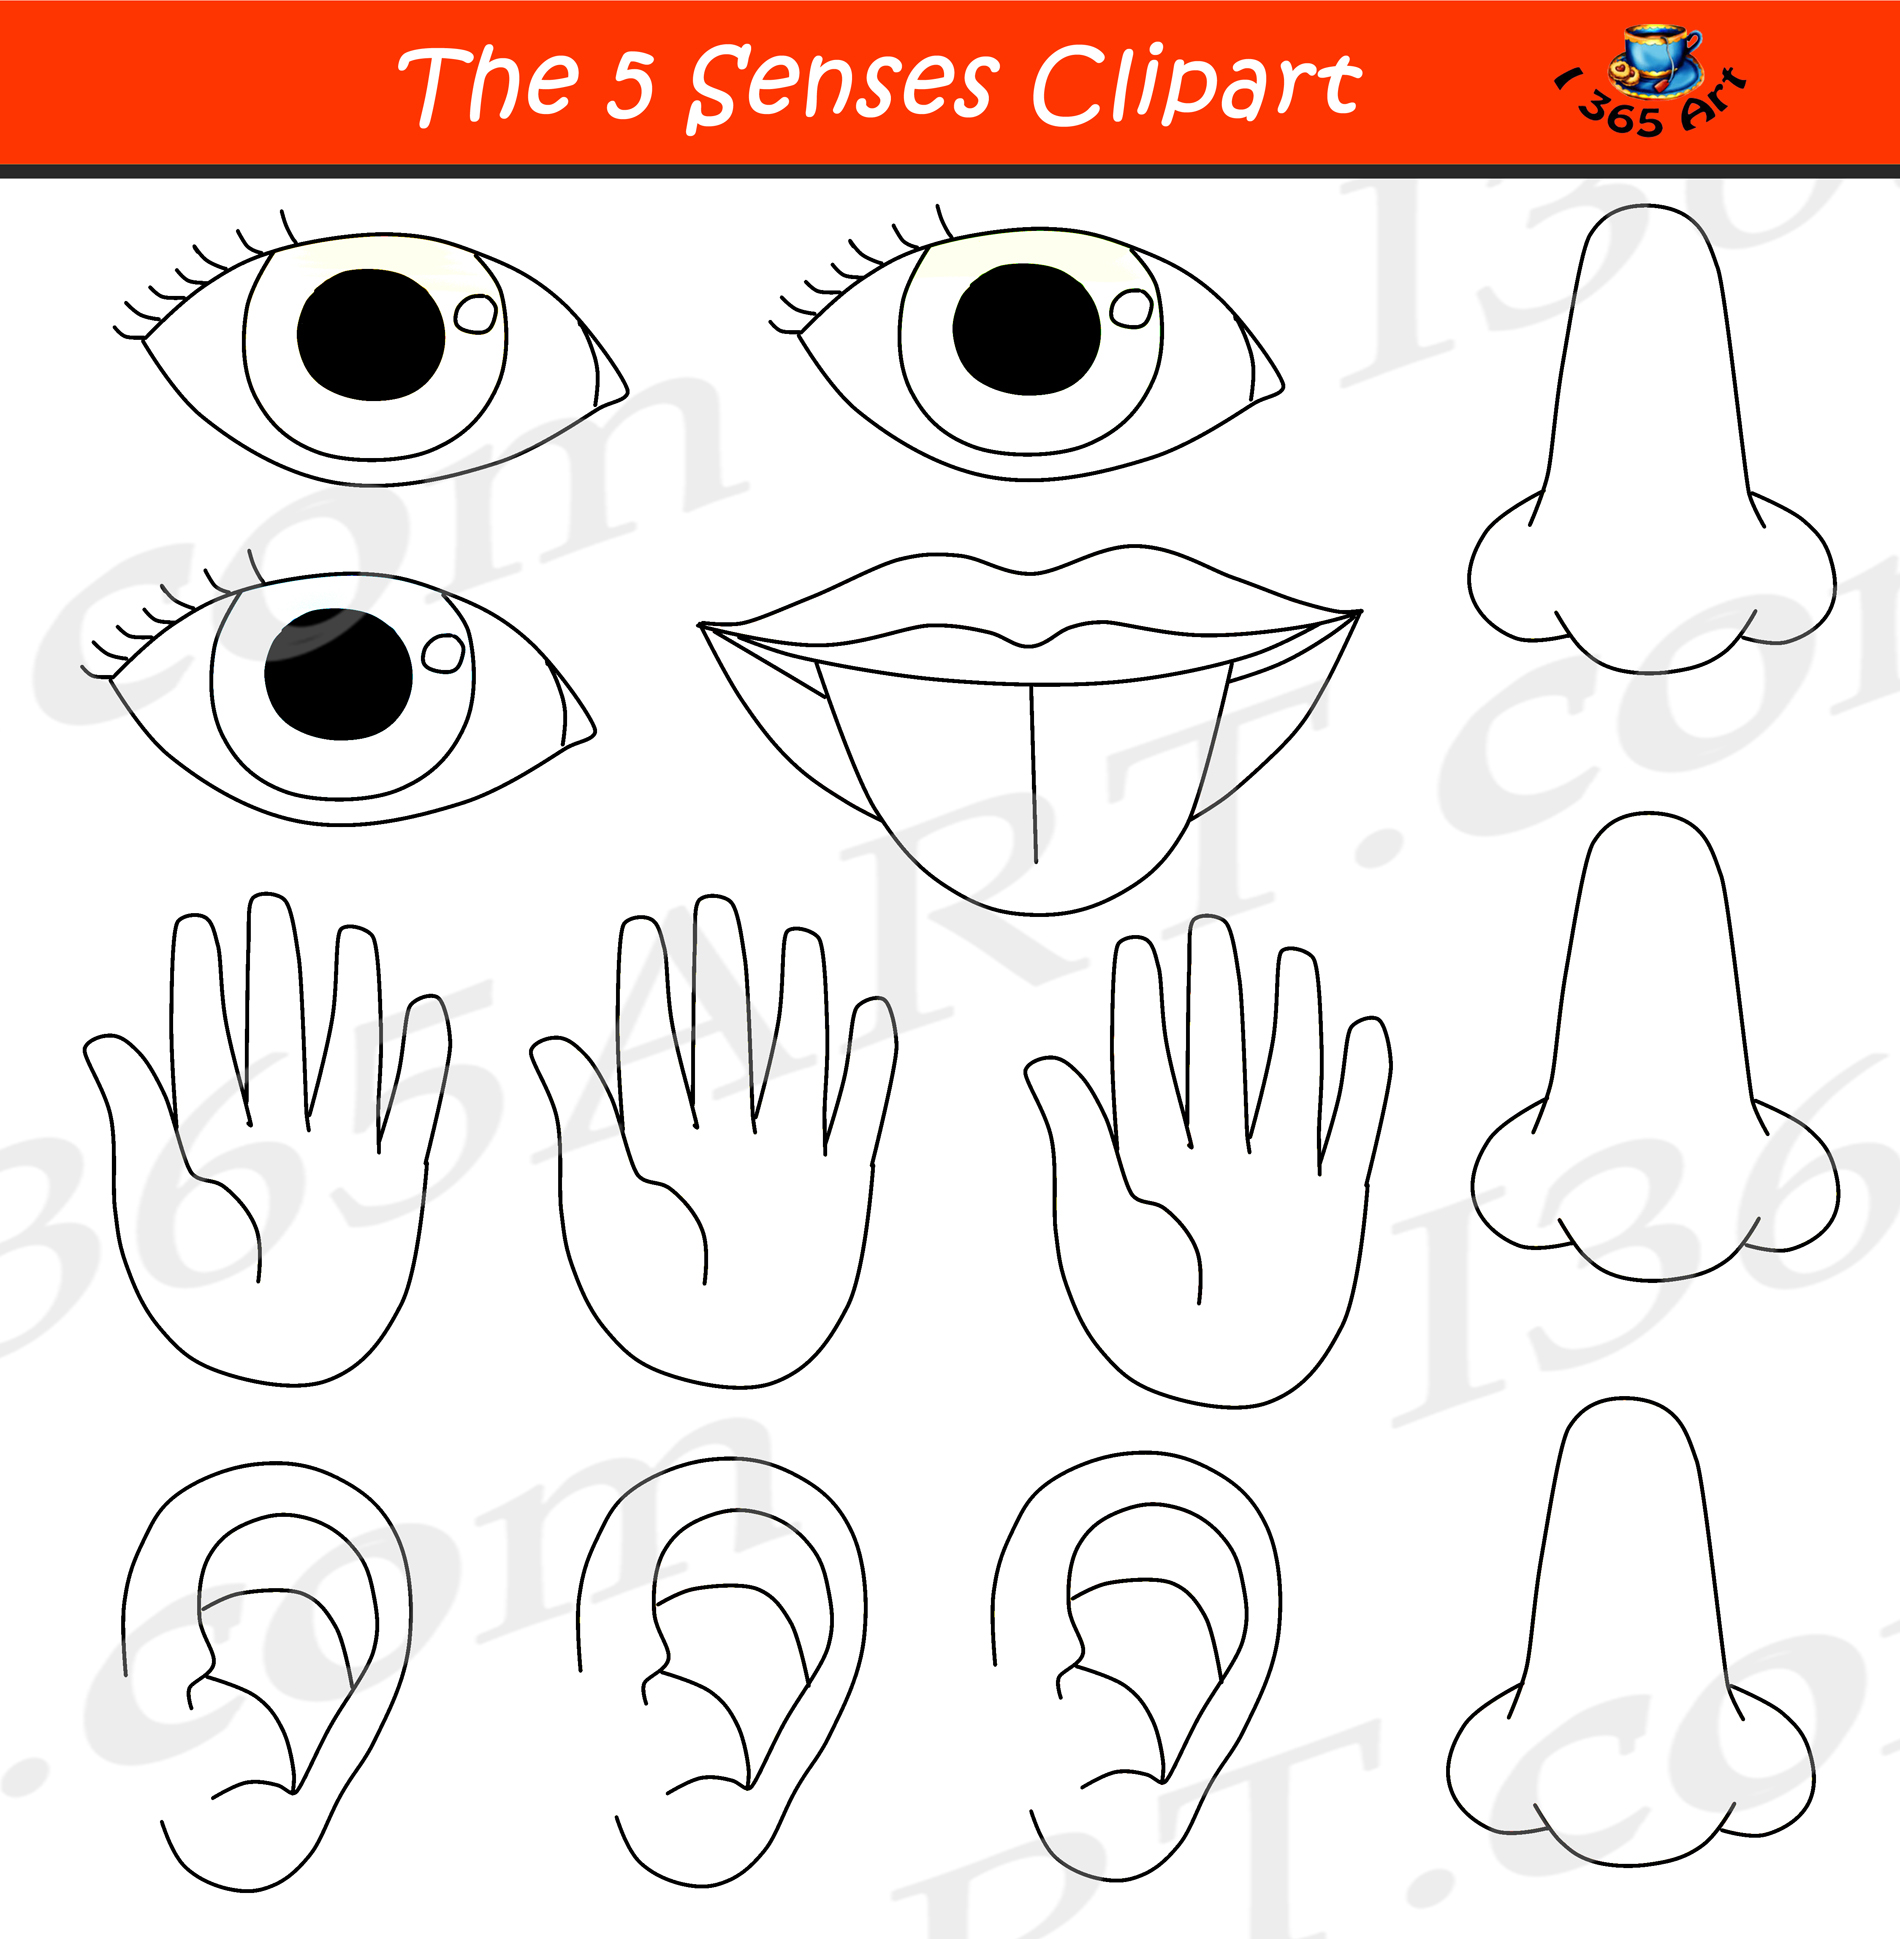 Clipart For The Five Senses